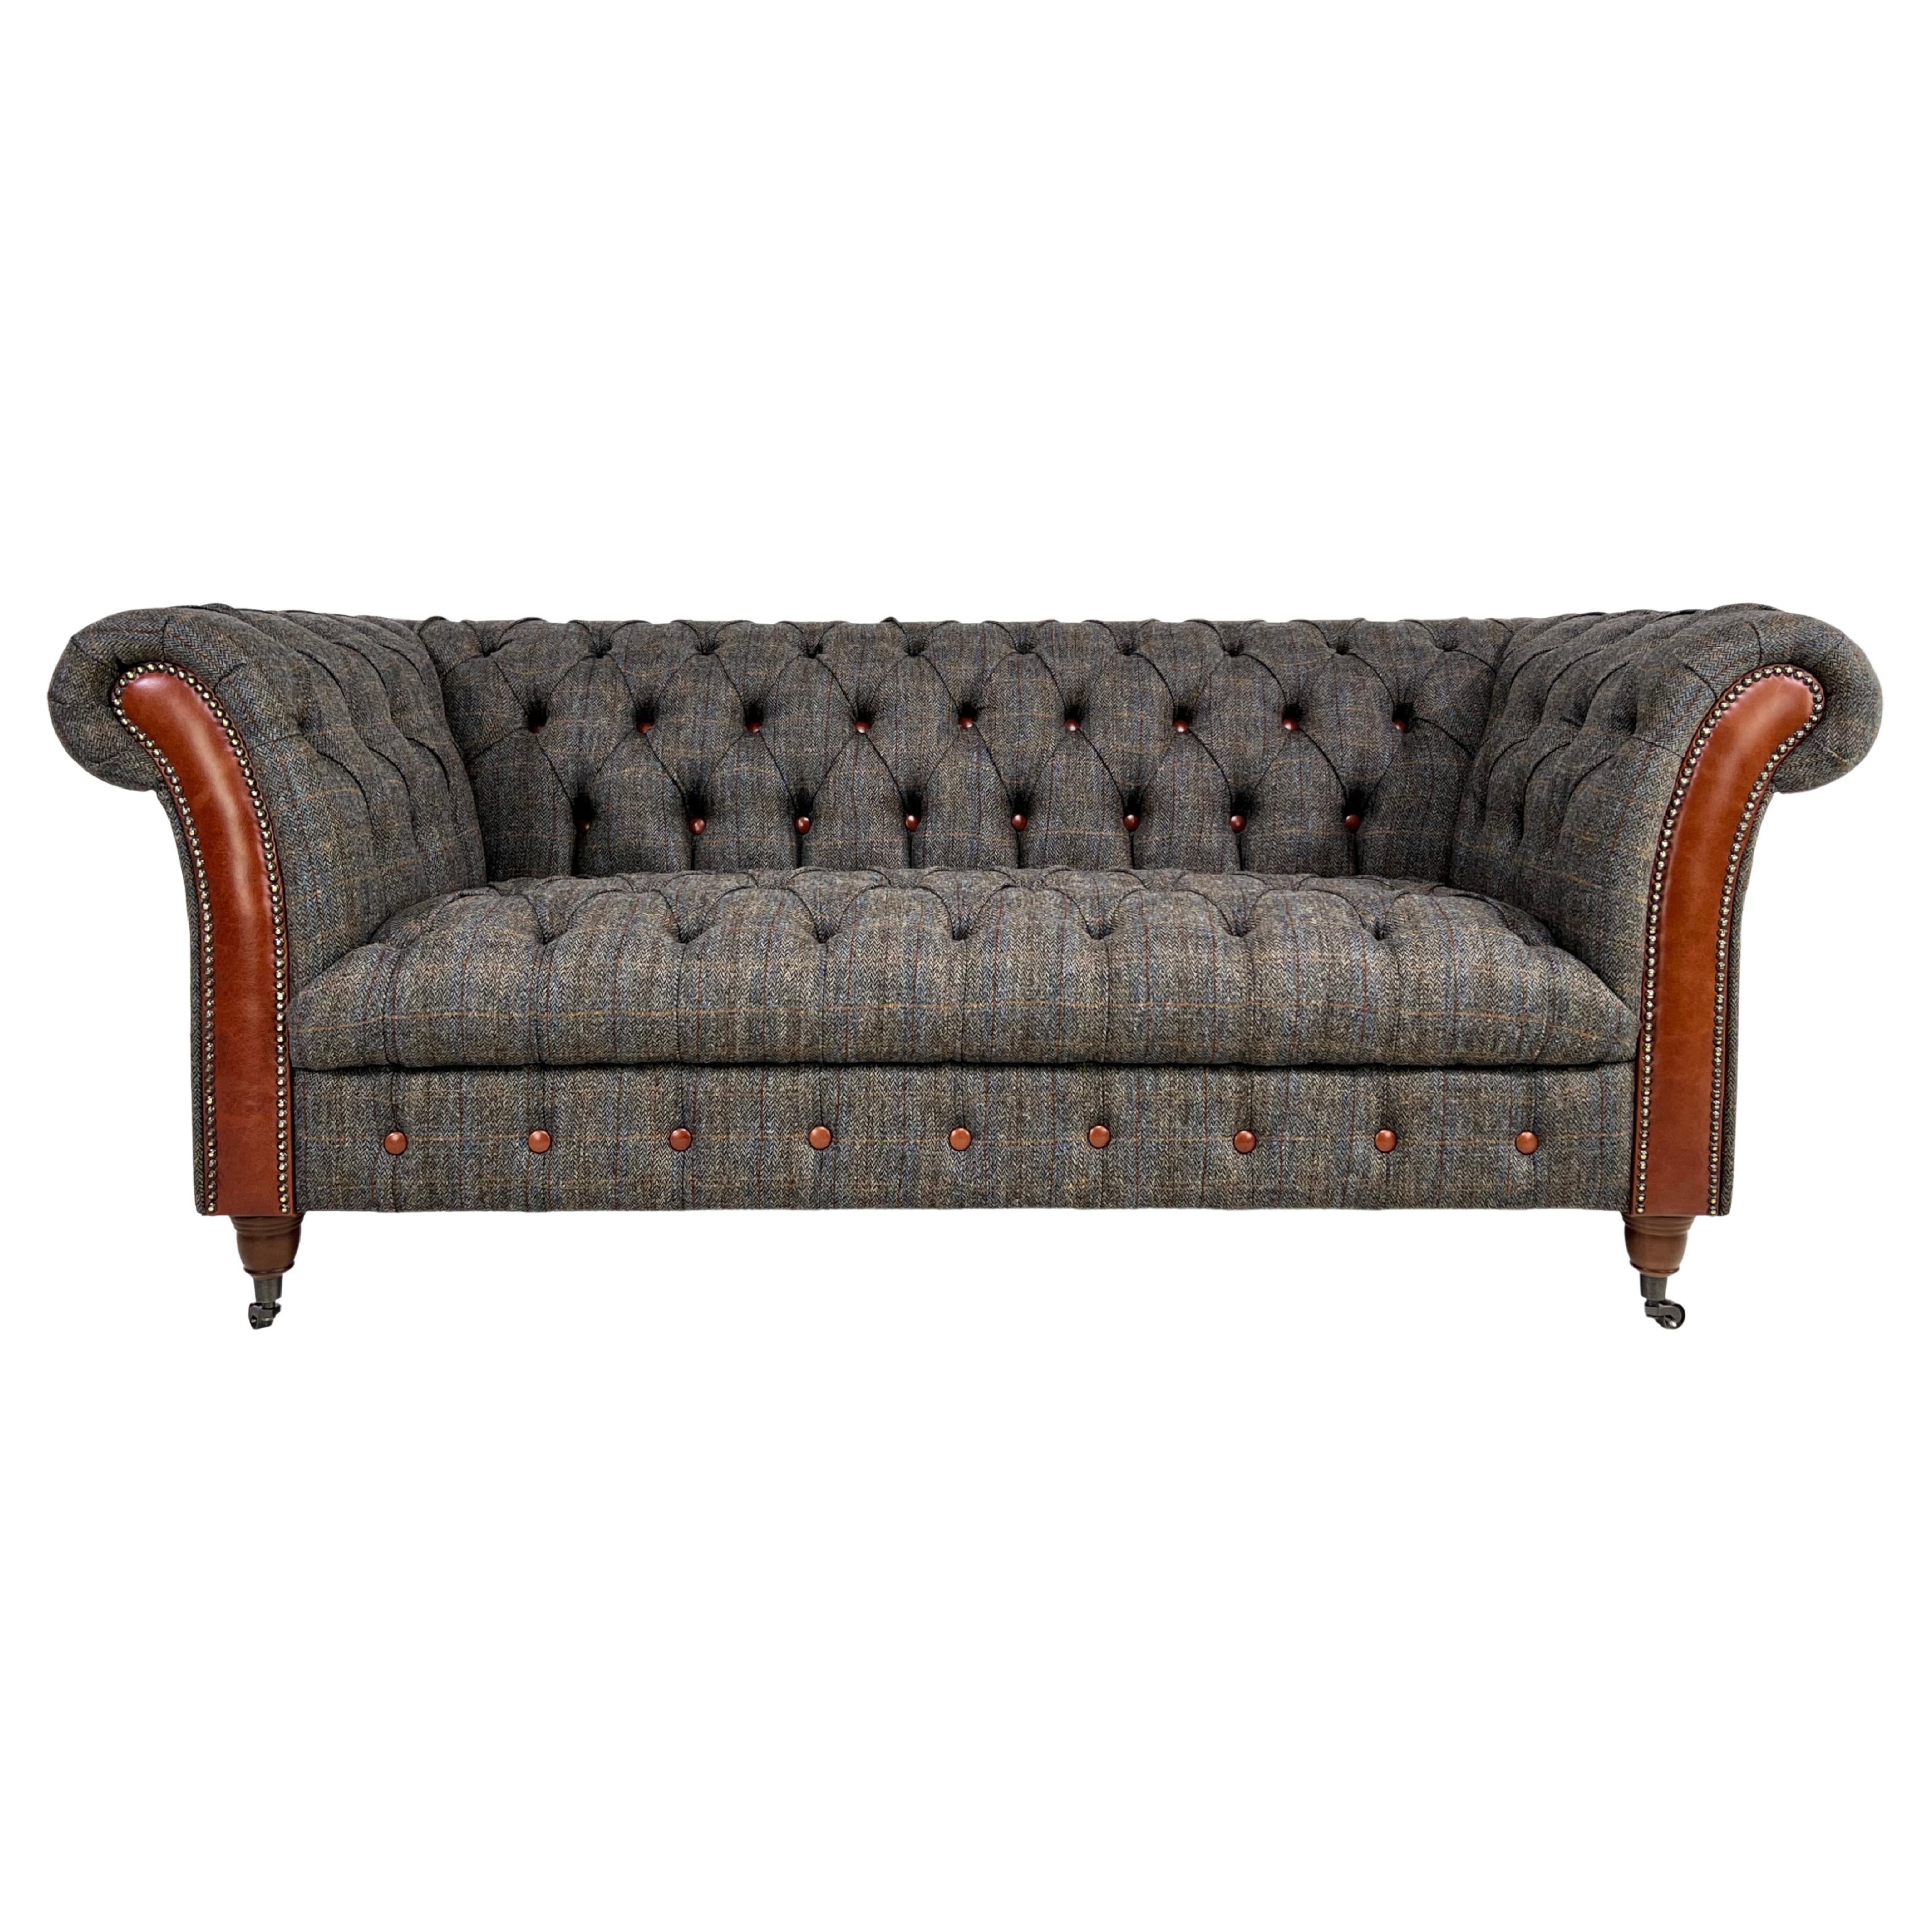 Wool Tweed Fabric with Leather Finishes and Wood Chesterfield Sofa For Sale